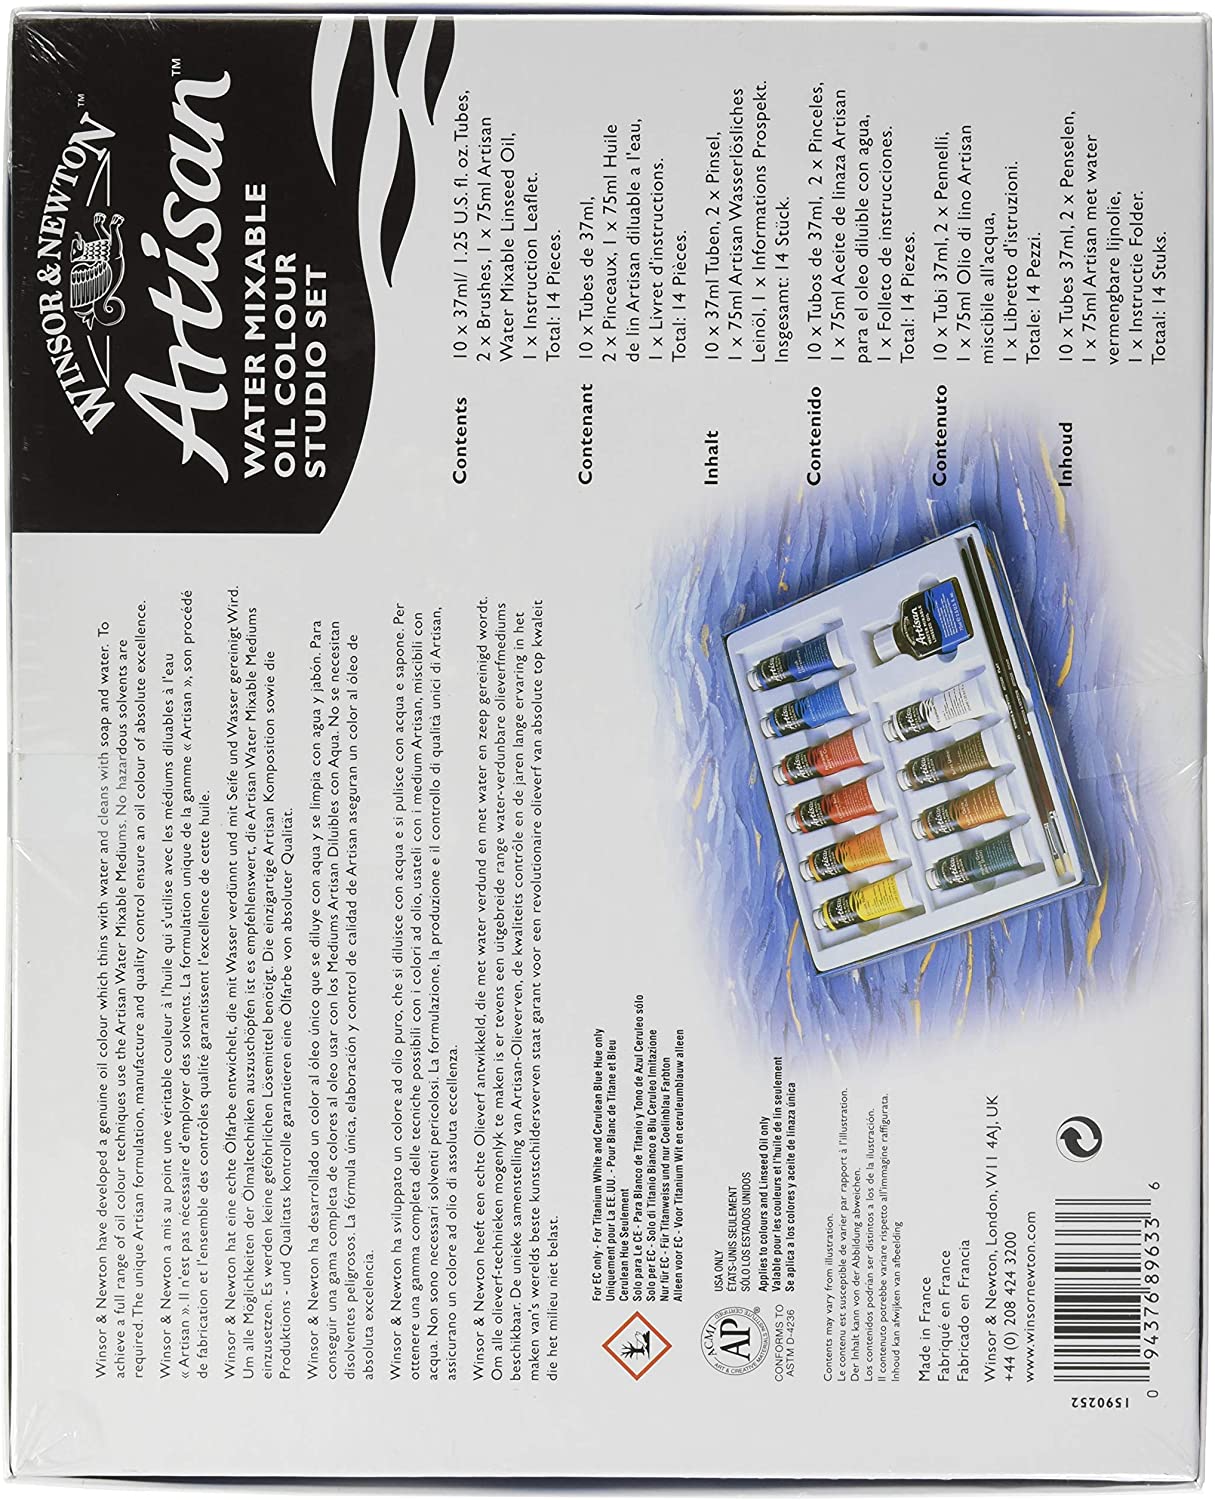 Winsor & Newton Artisan Water Mixable Oil Color Paint back